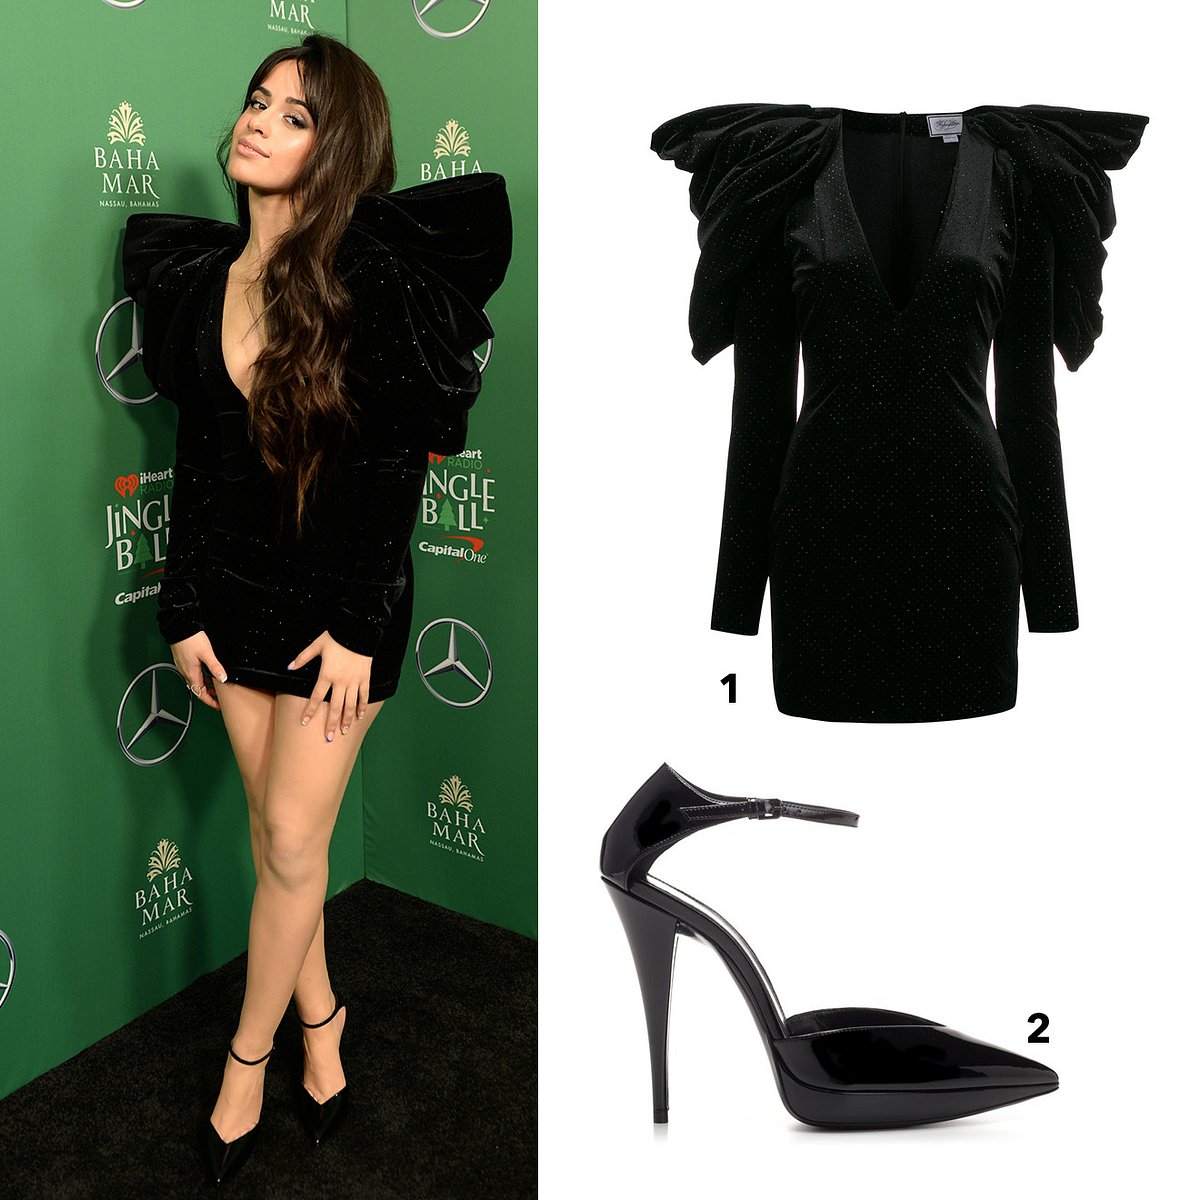 steal Style, Star Style, Star Outfits, Outfit Camila Cabello, Klamotten Stars, Klamotten Camila Capello, look like Camila Cabello, wie Camila Cabello aussehen